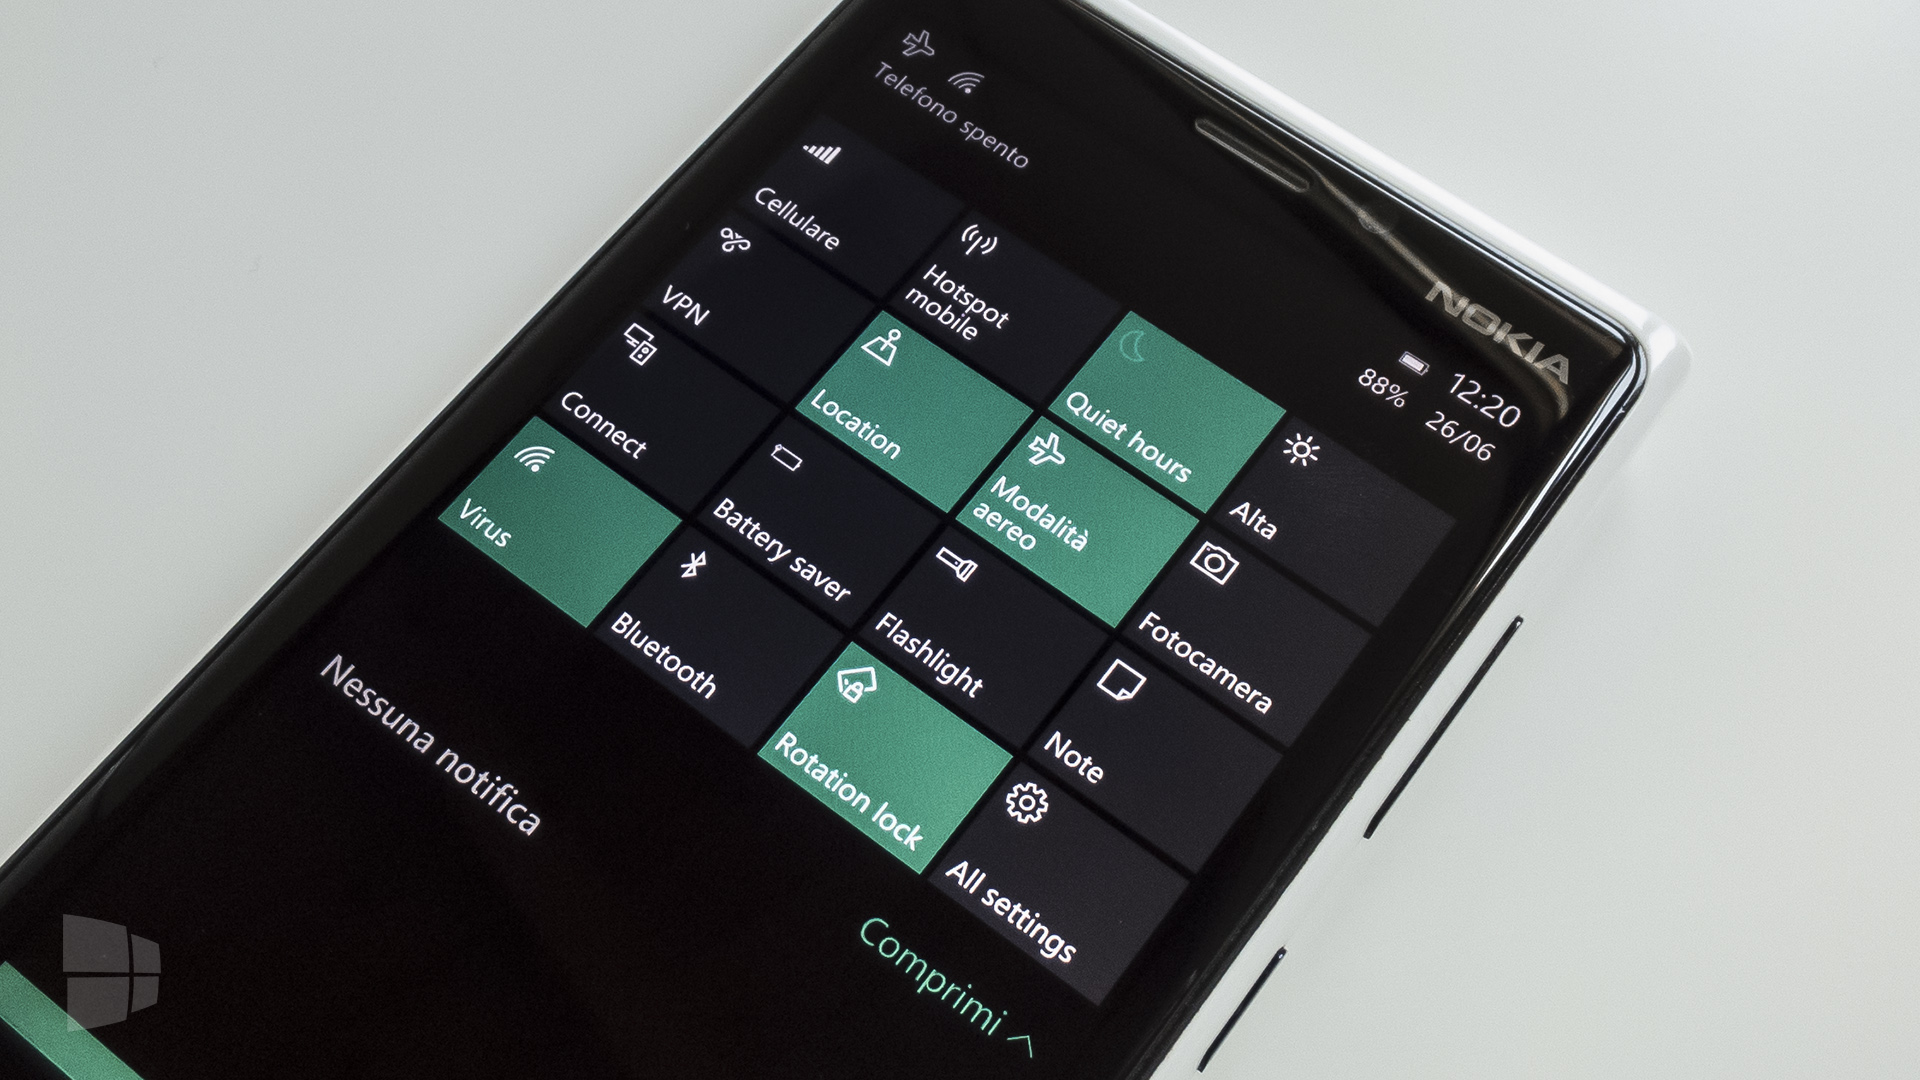 Windows 10 Mobile Insider Preview